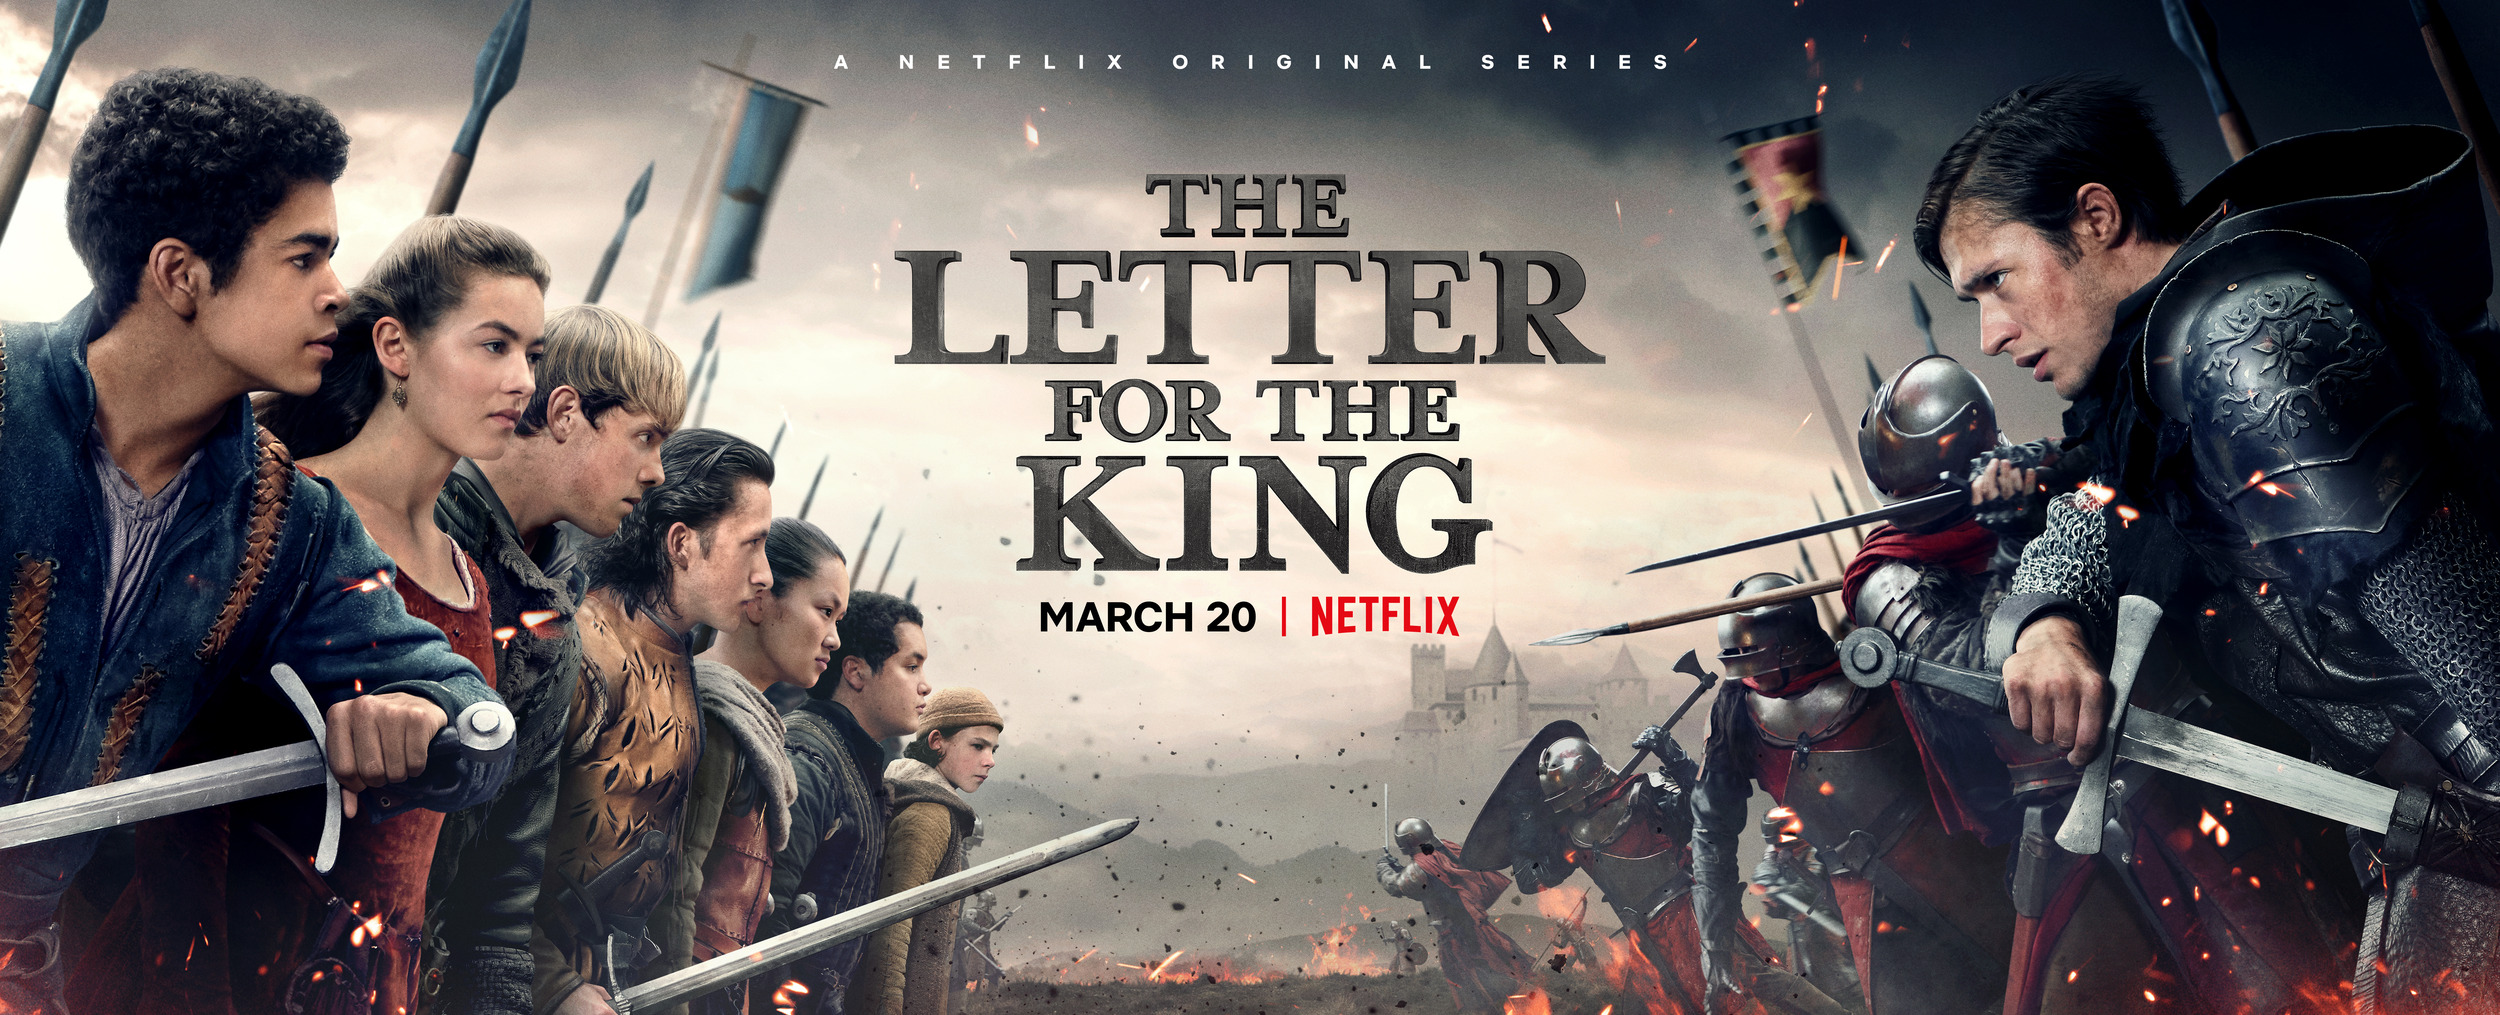 Mega Sized TV Poster Image for The Letter for the King (#2 of 2)